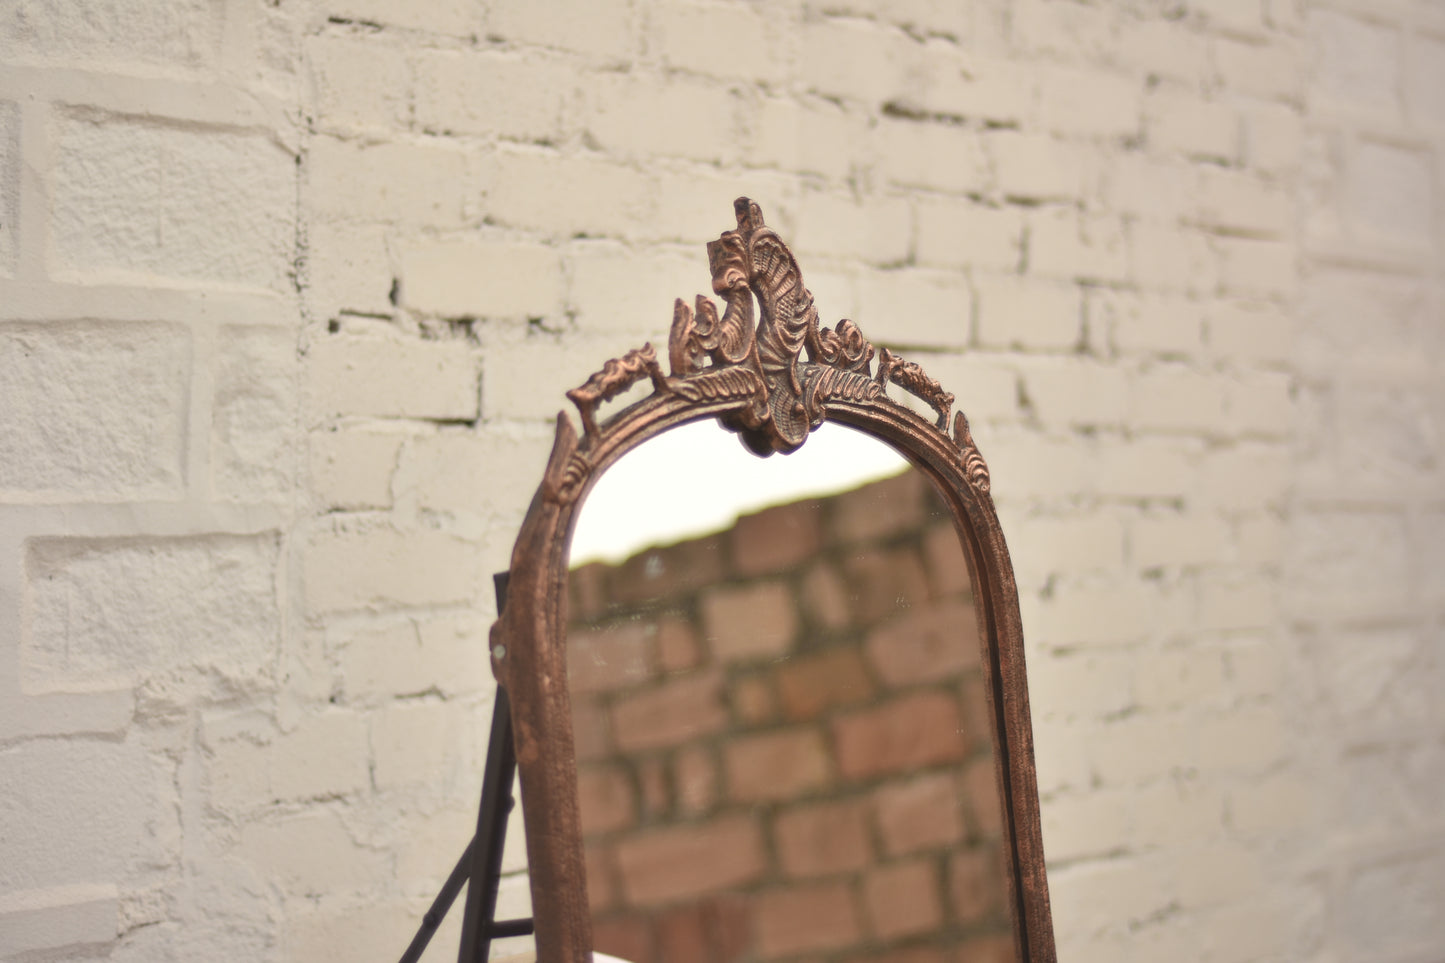 Victorian Arched Full-length Mirror with Stand